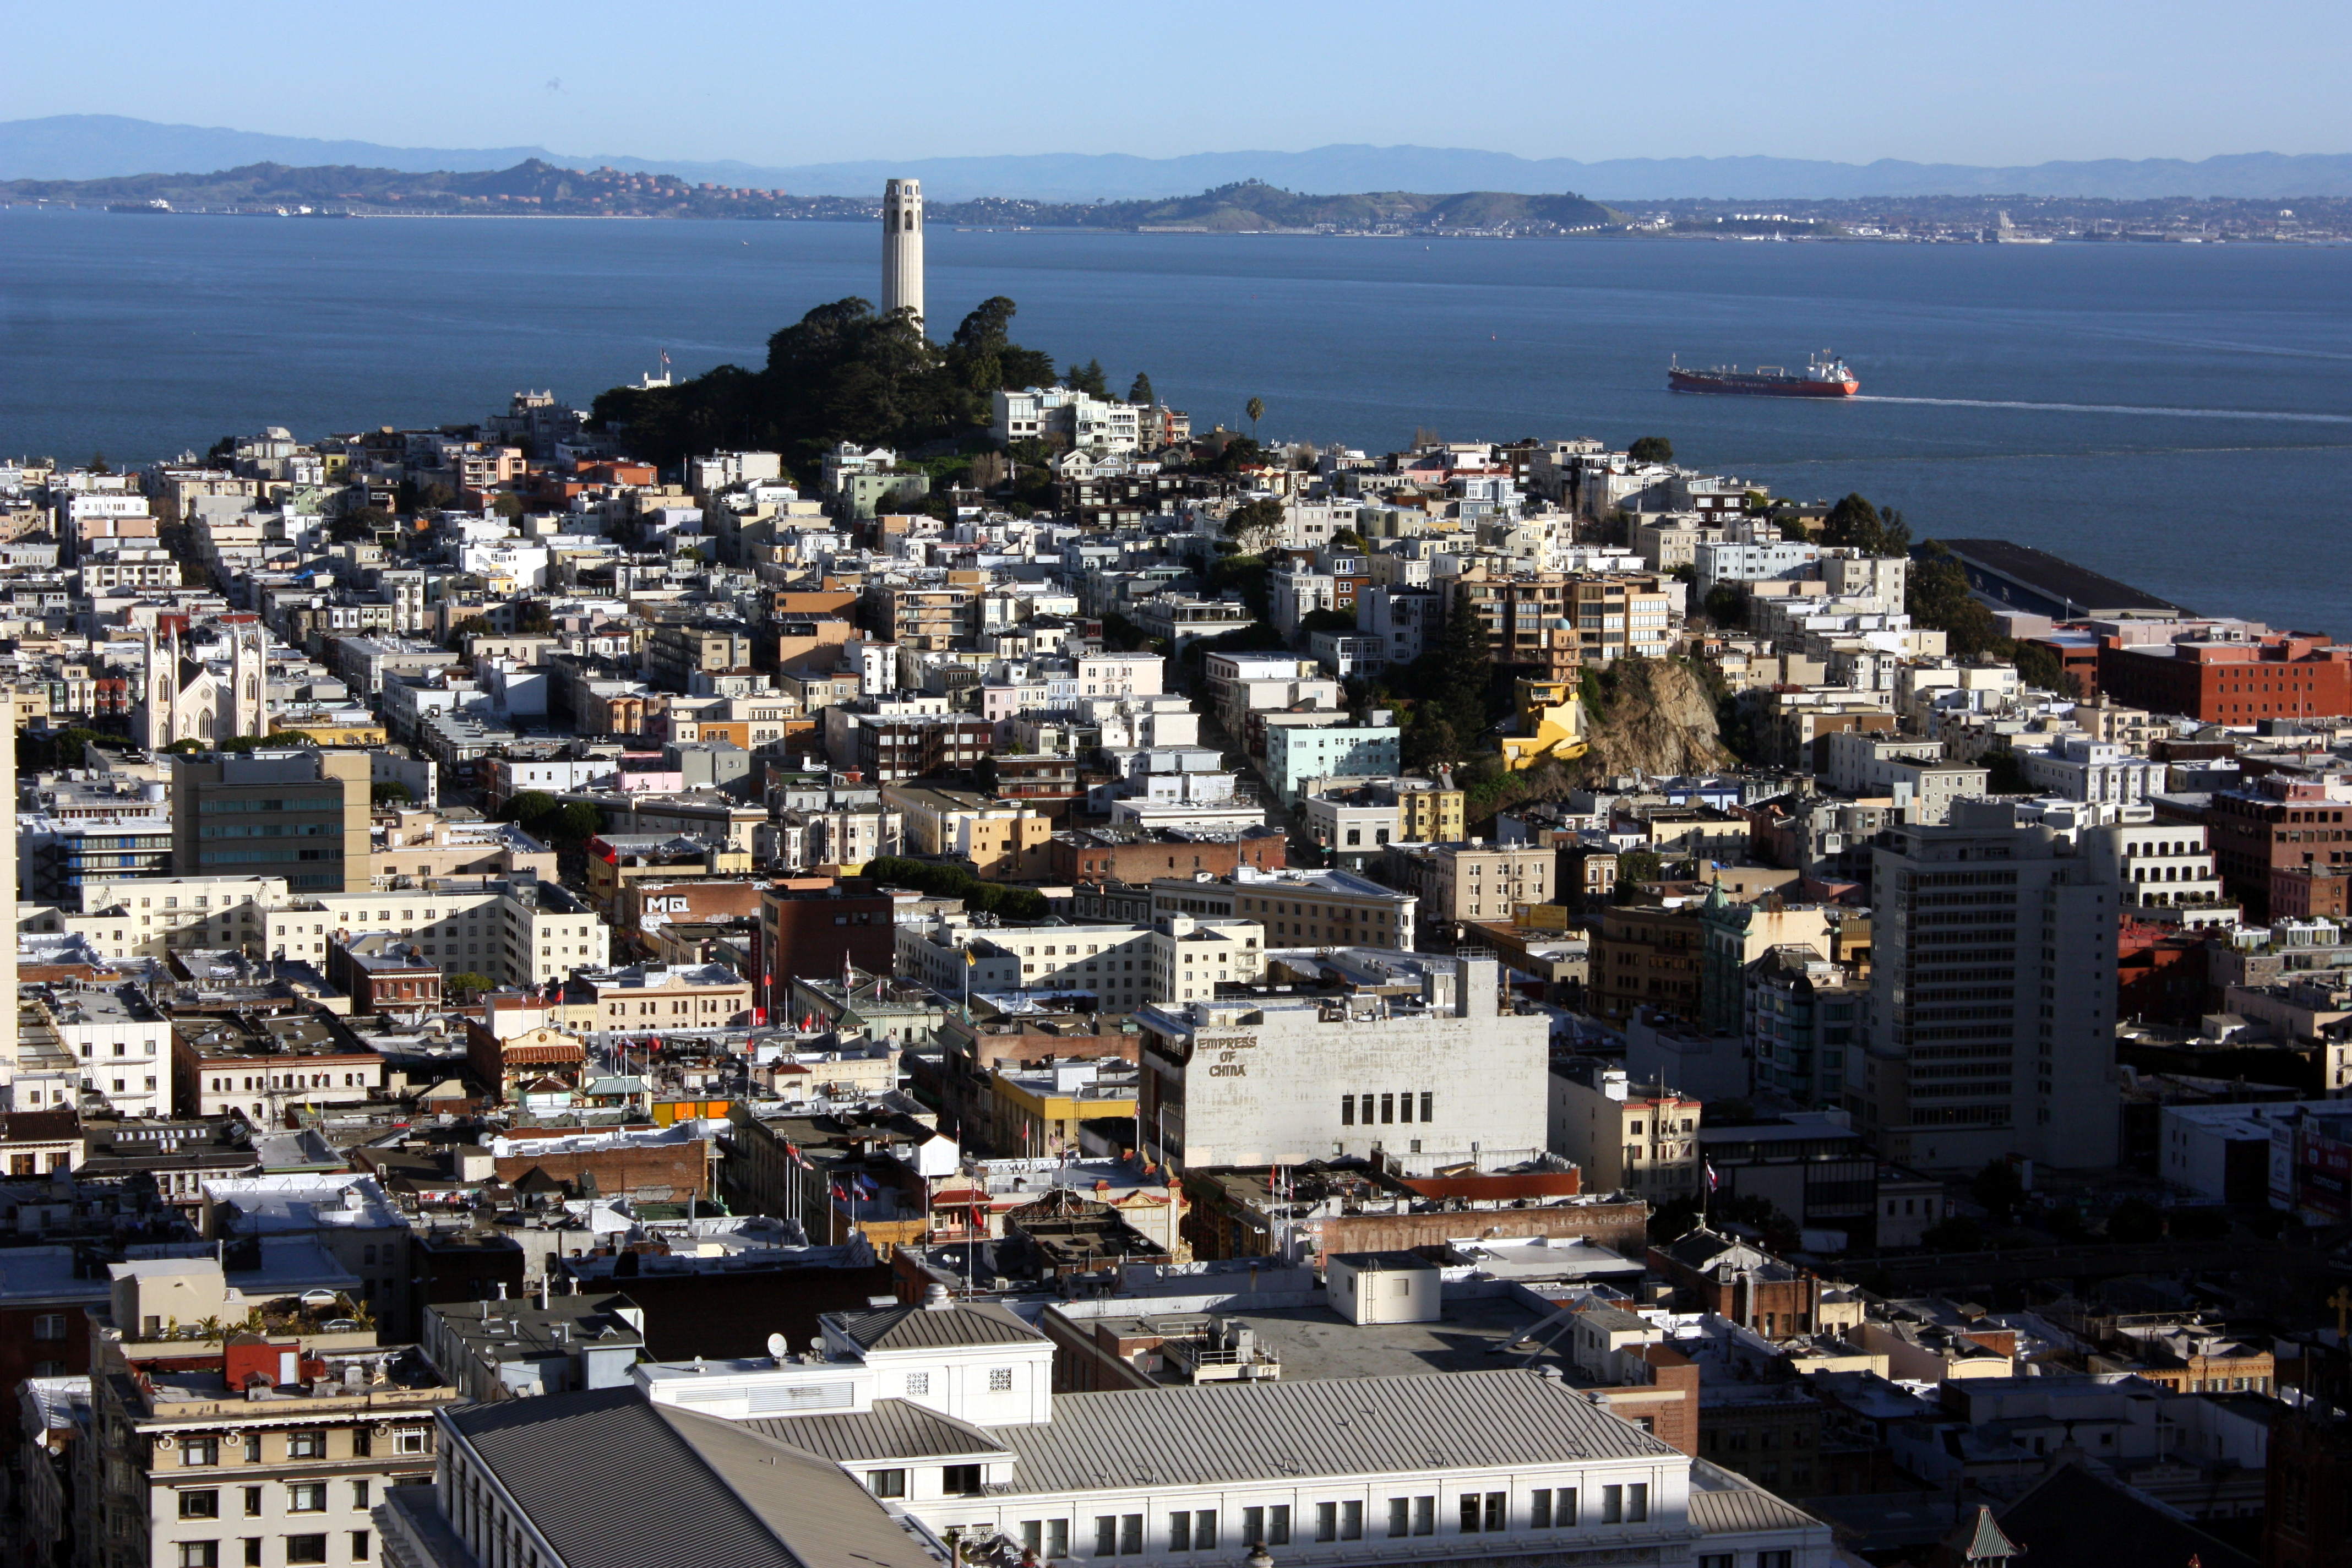 Telegraph Hill and Coit Tower